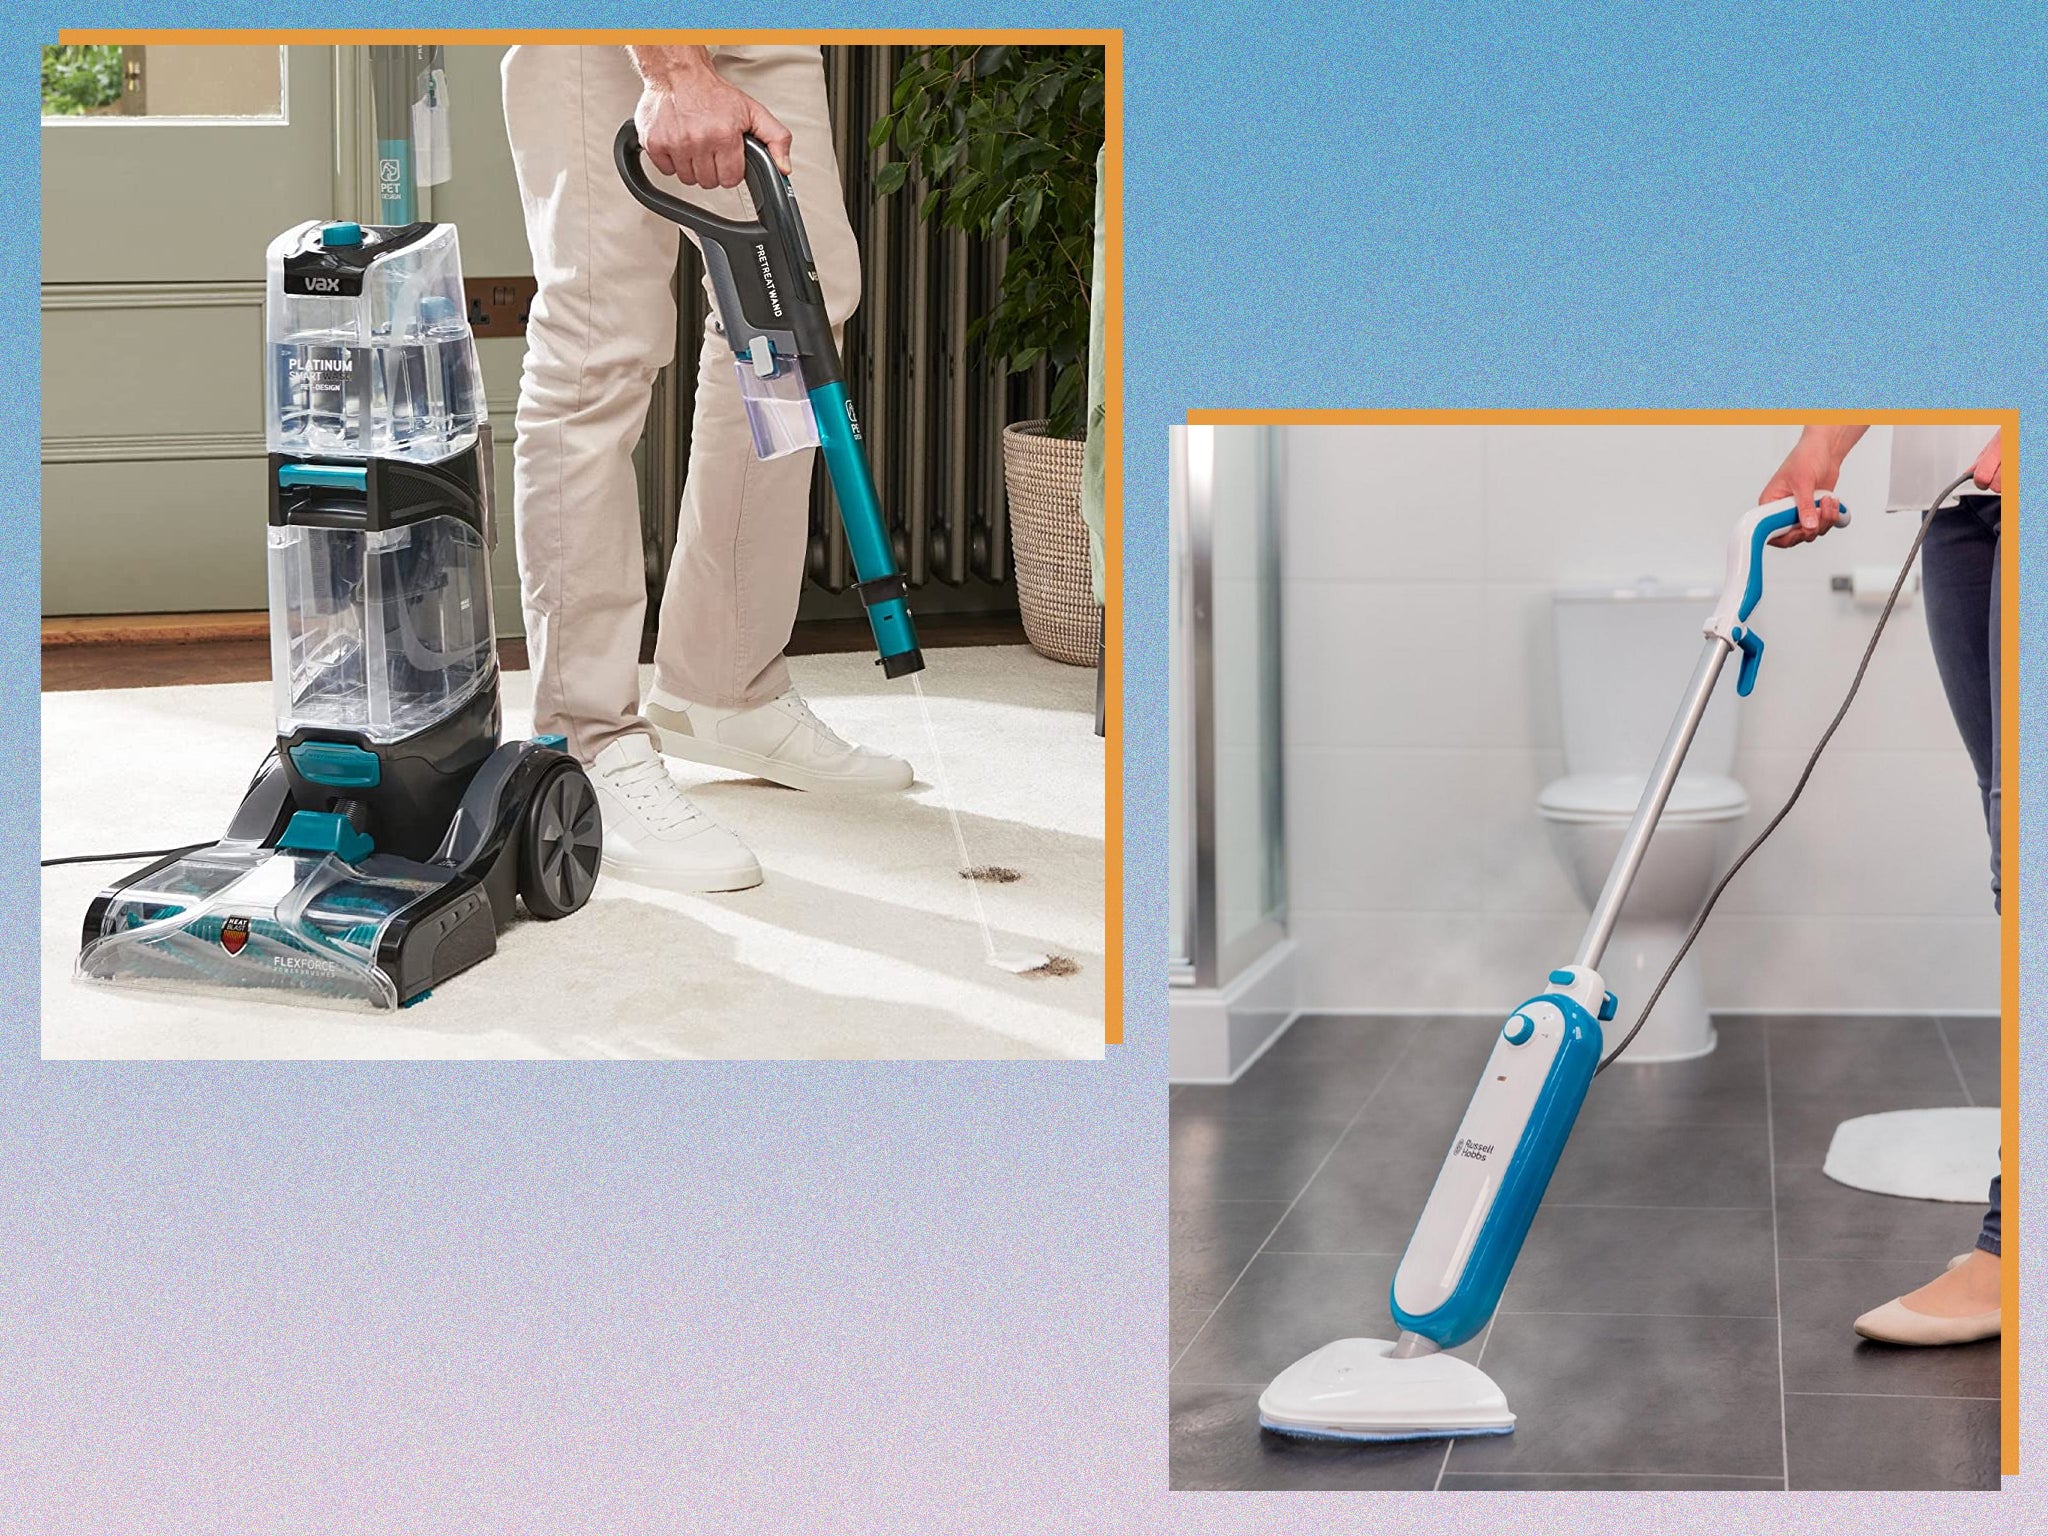 The cleaners work by drawing out the dirt with powerful suction, a rotating brush and warm water mixed with cleaning fluid